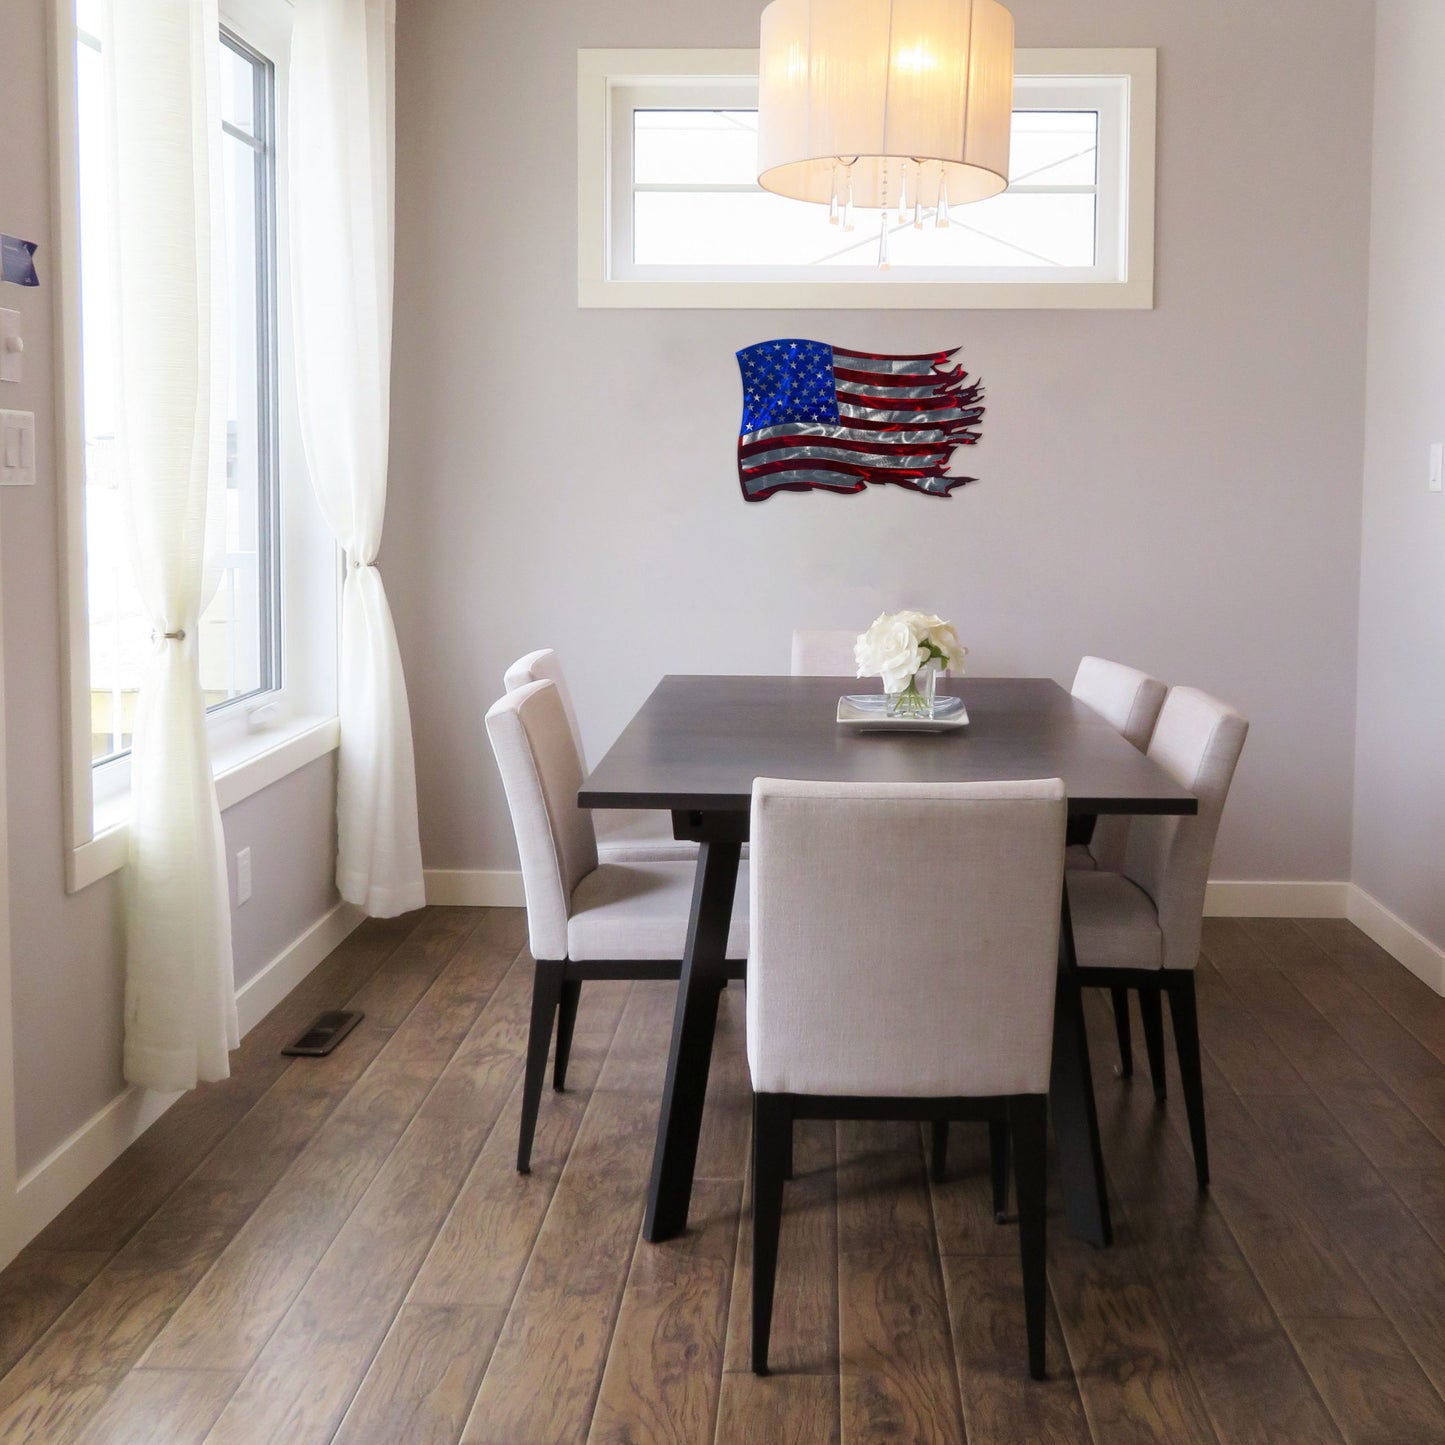 flag-in-dining-room-scaled